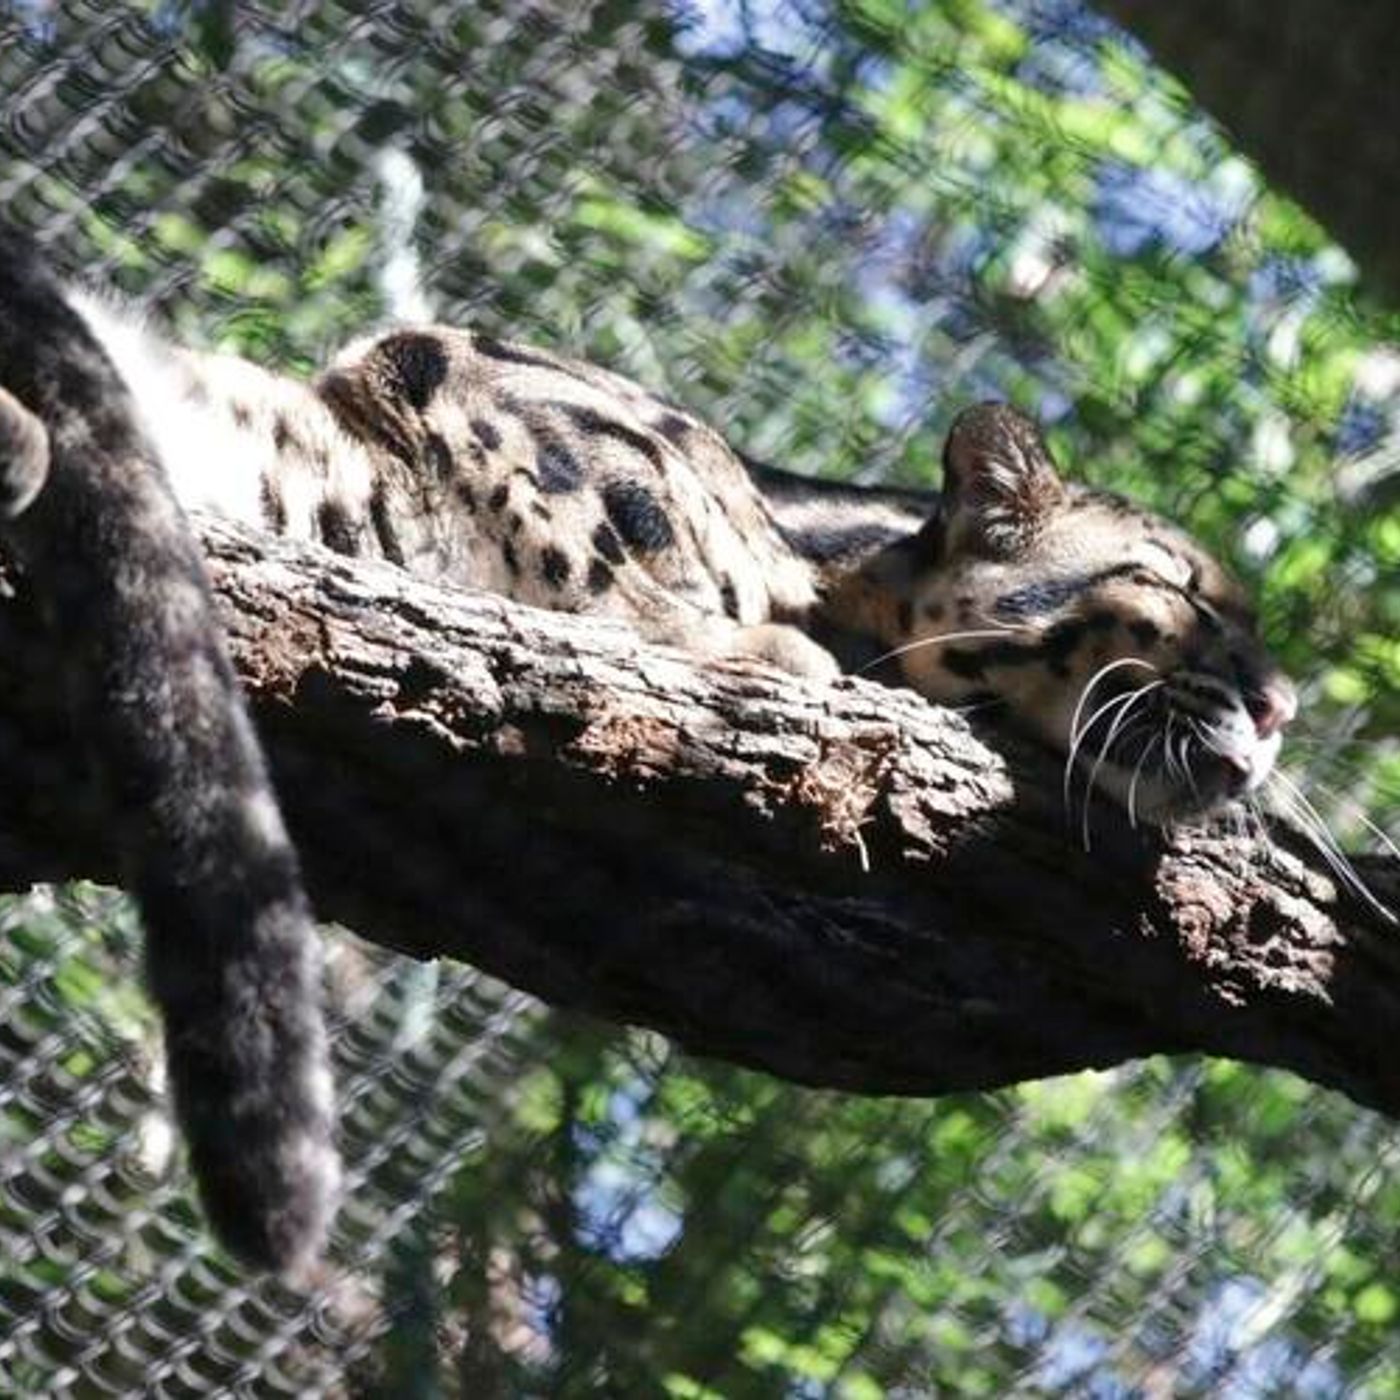 Police investigate after Dallas Zoo missing leopard is found